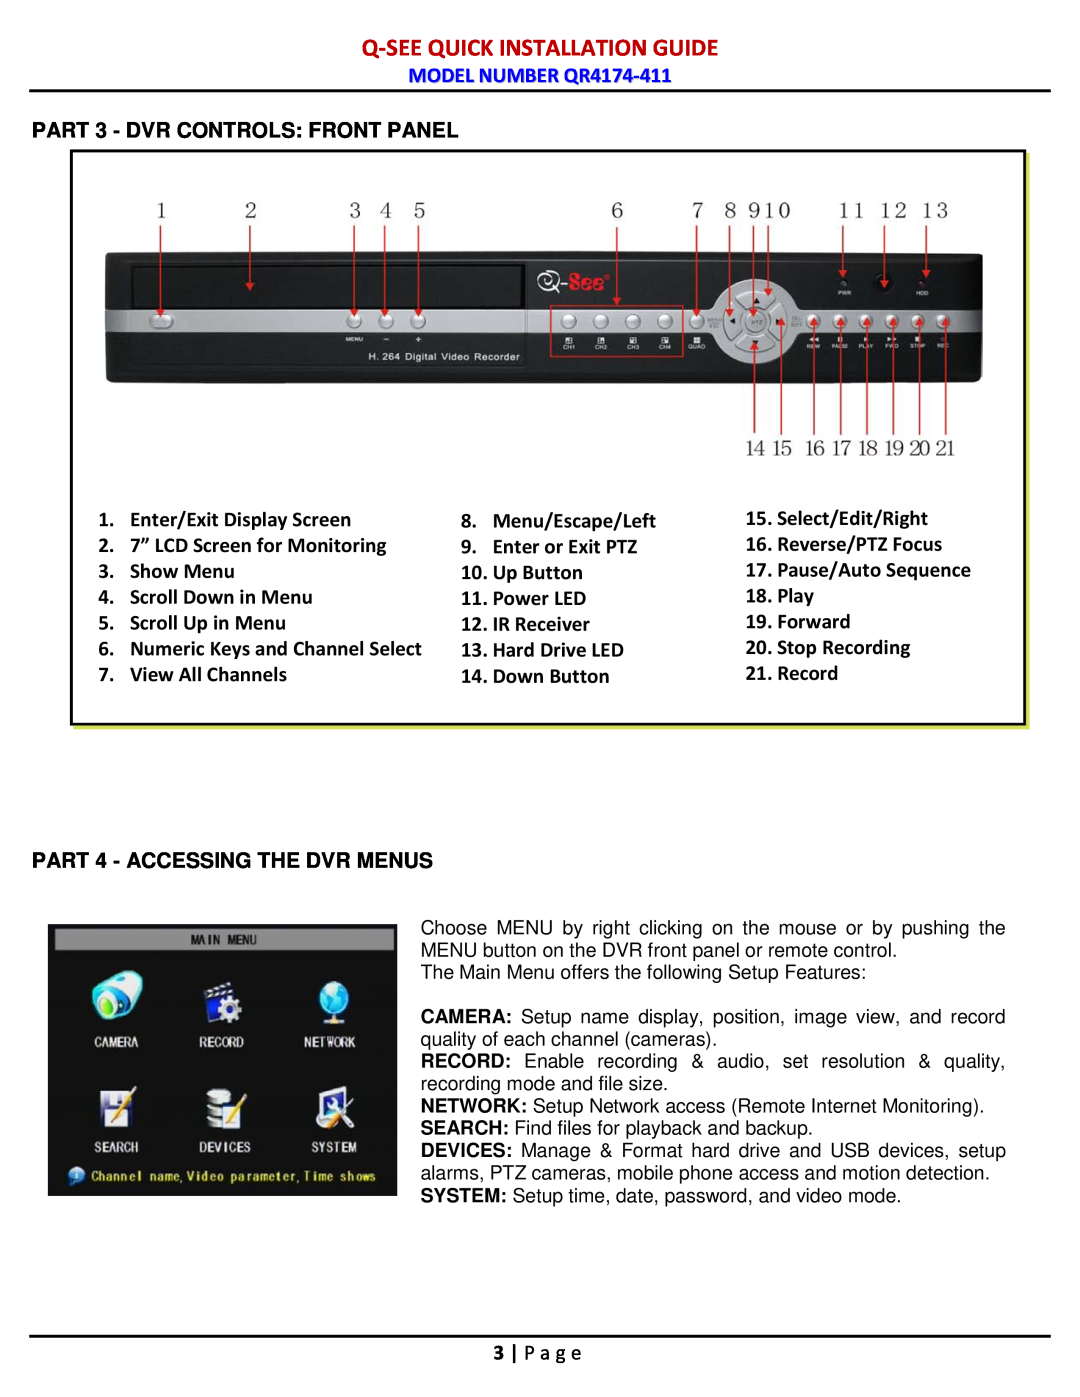 Q-See QR4174-411 manual PART 3 - DVR CONTROLS FRONT PANEL, PART 4 - ACCESSING THE DVR MENUS, Q-Seequick Installation Guide 